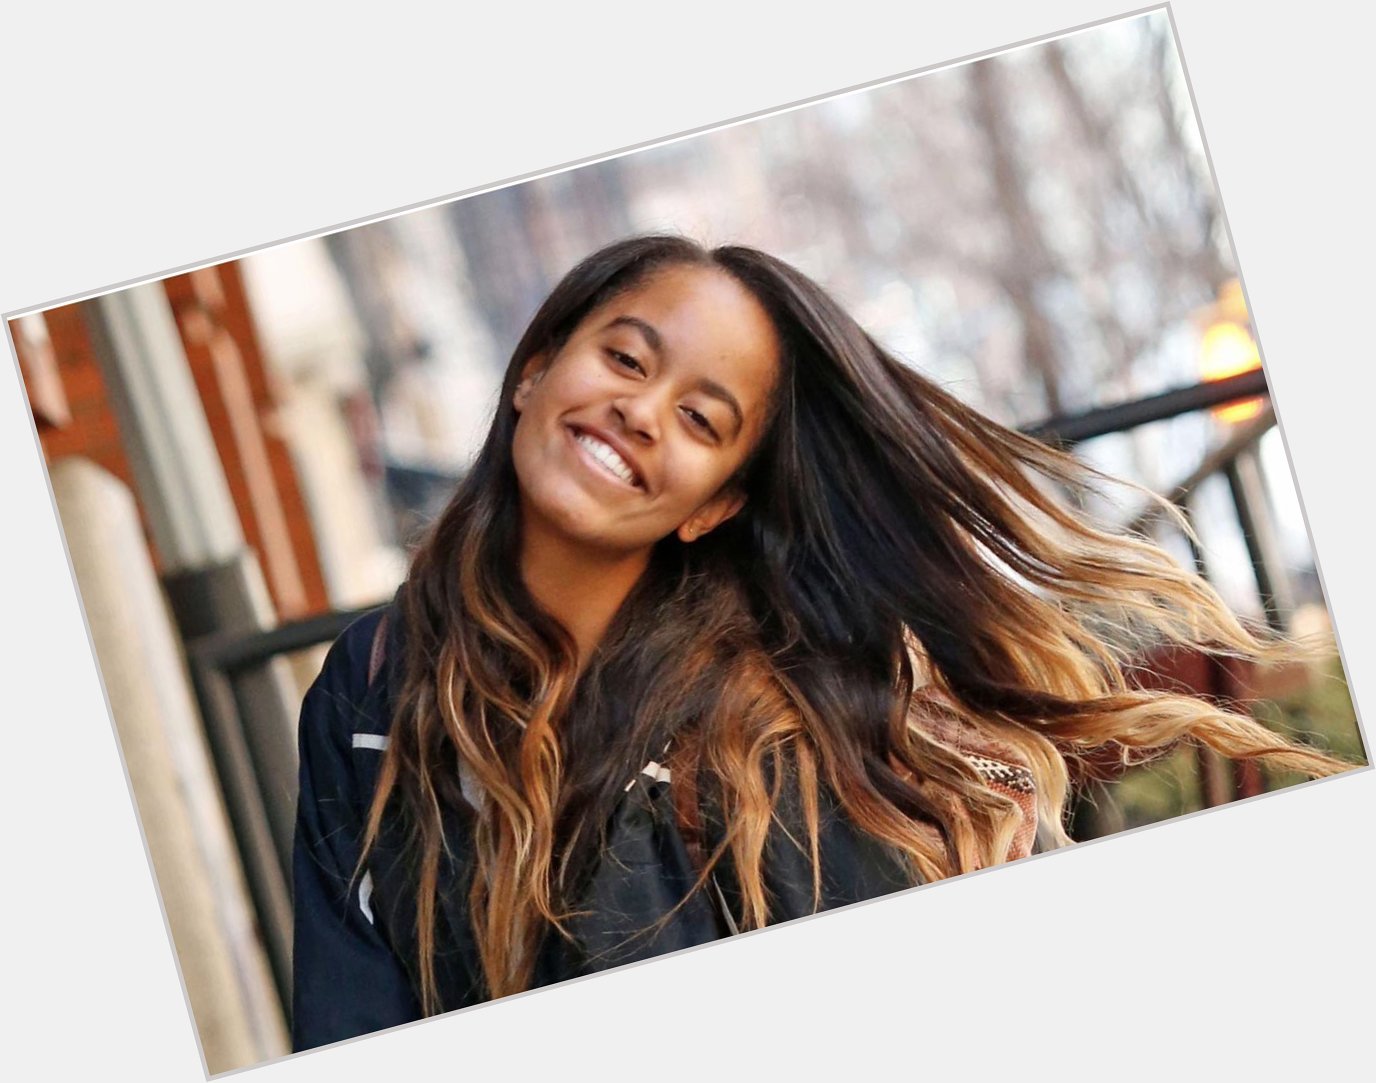 Happy Malia Obama Day!                Malia Obama turns 21! Happy birthday to our forever First Daughter!   